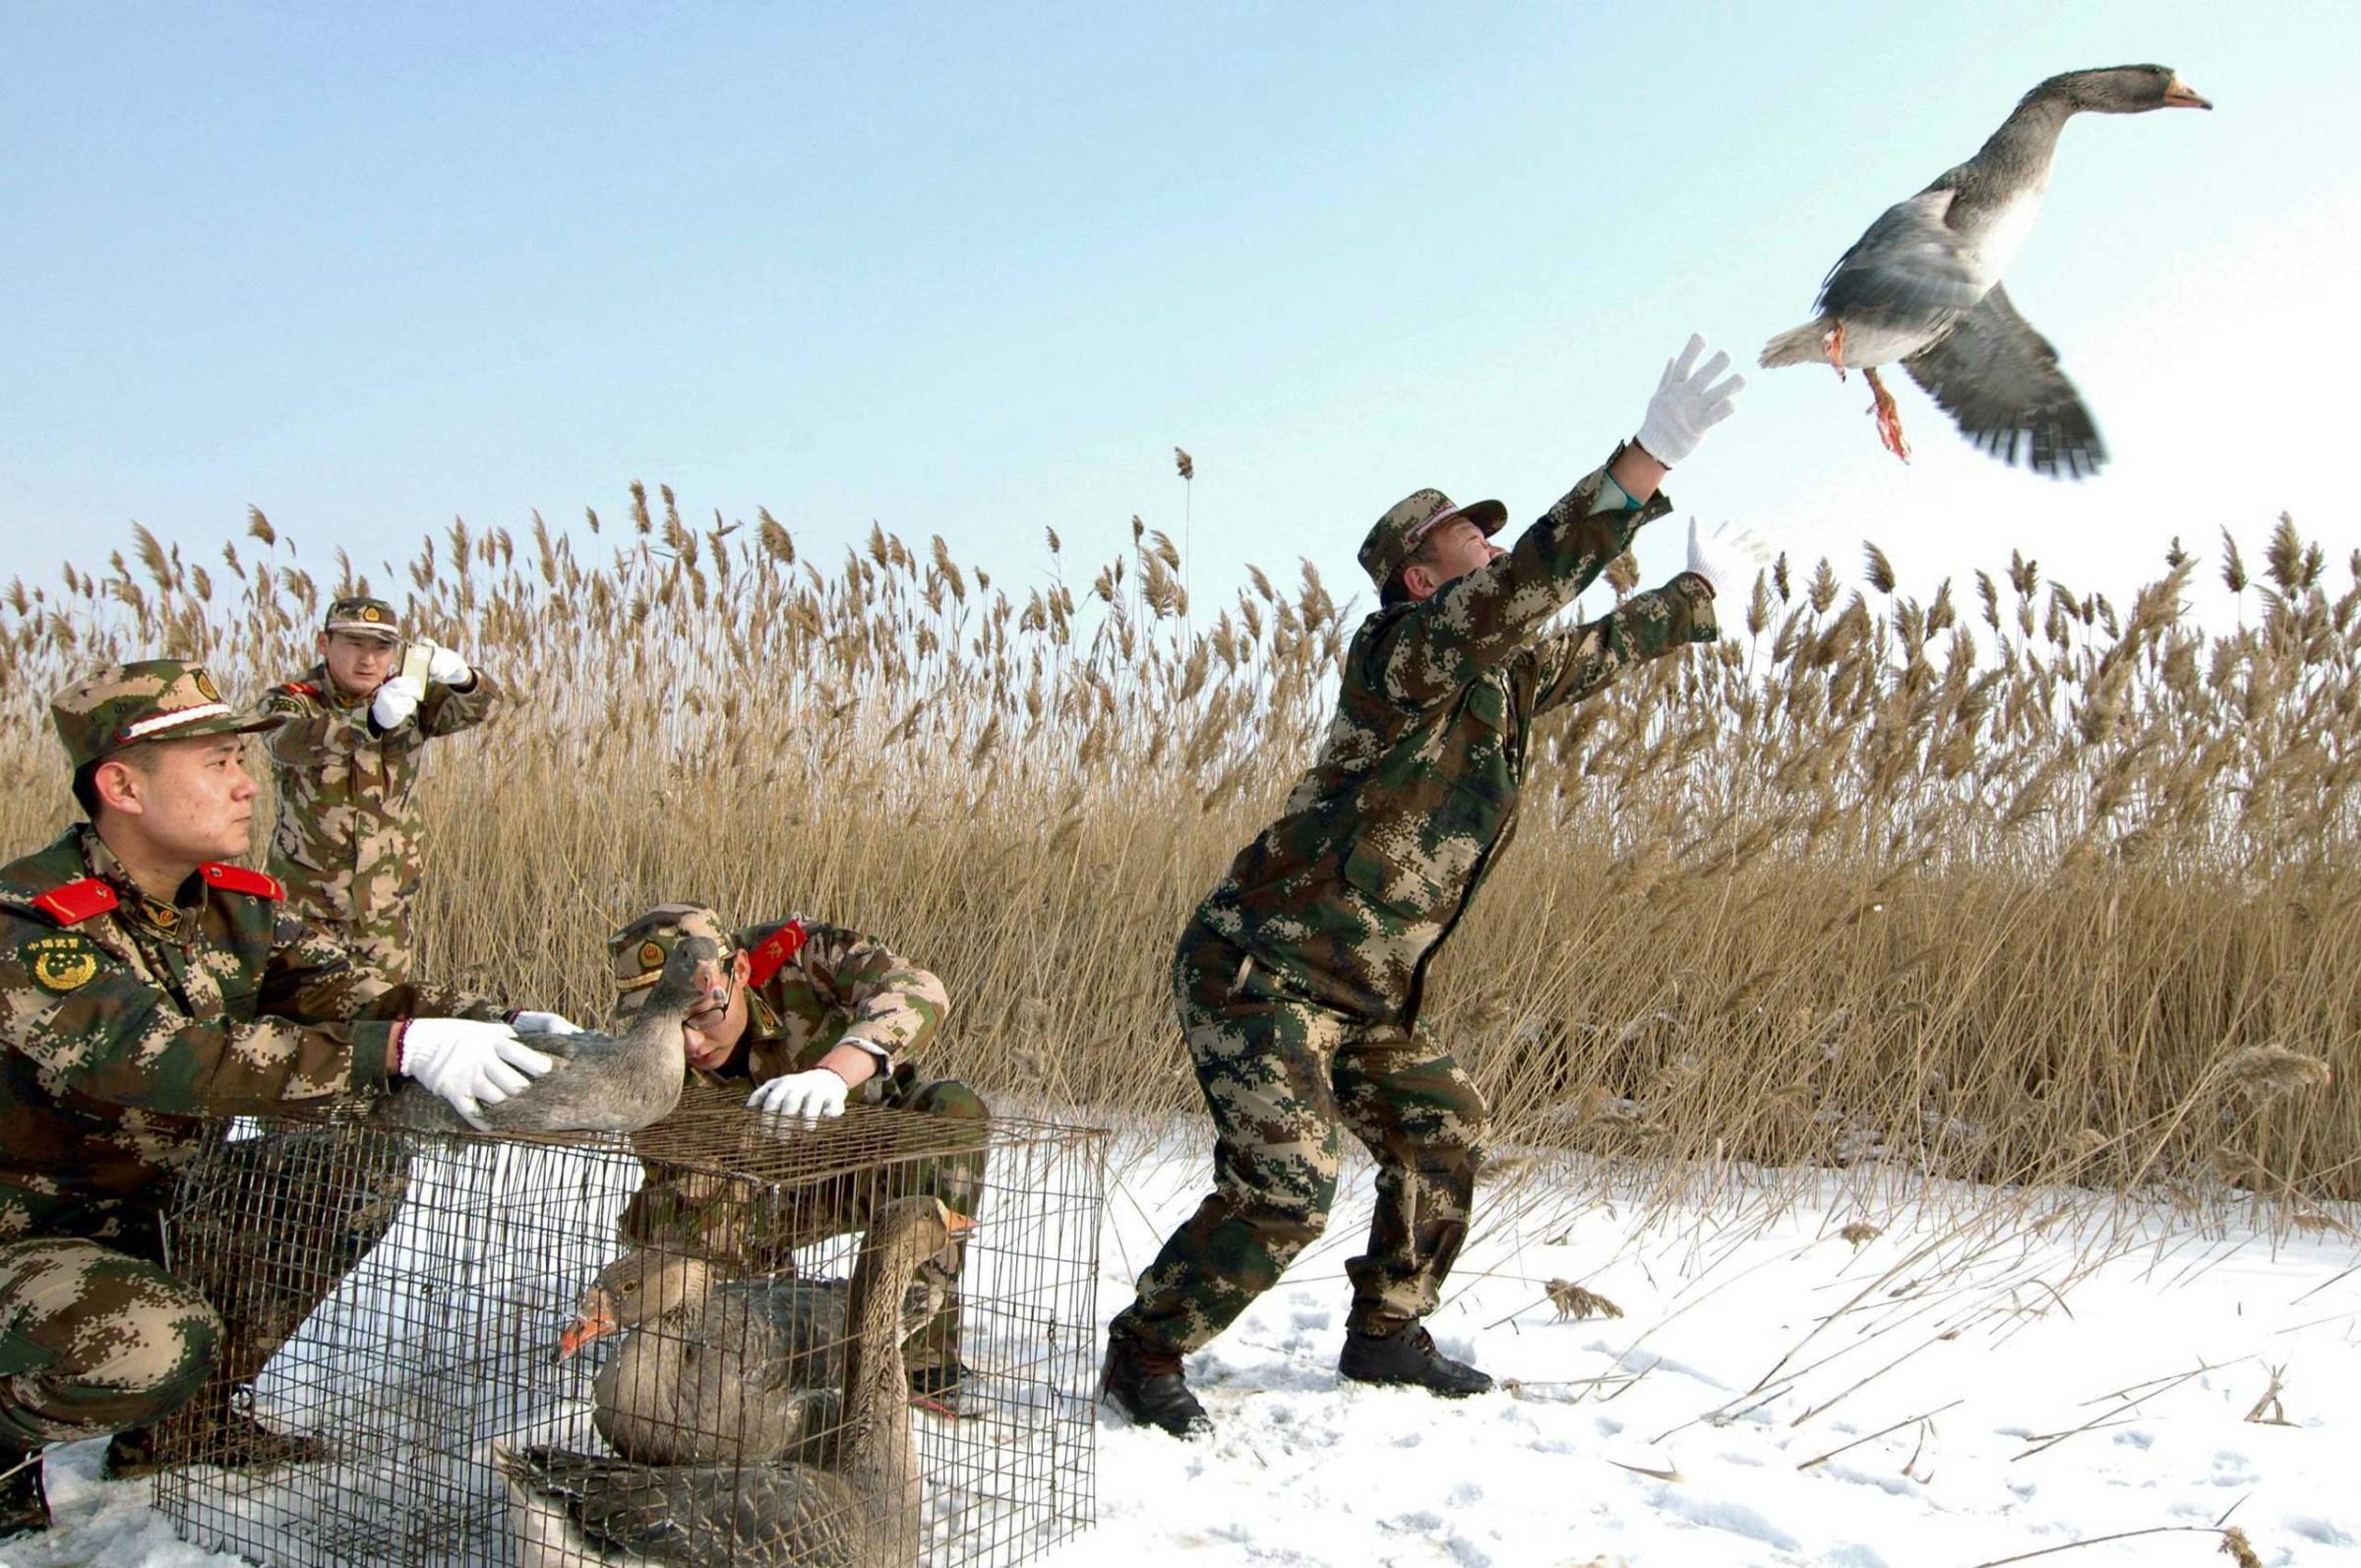 A paramilitary policeman releases a wild goose in Linghai